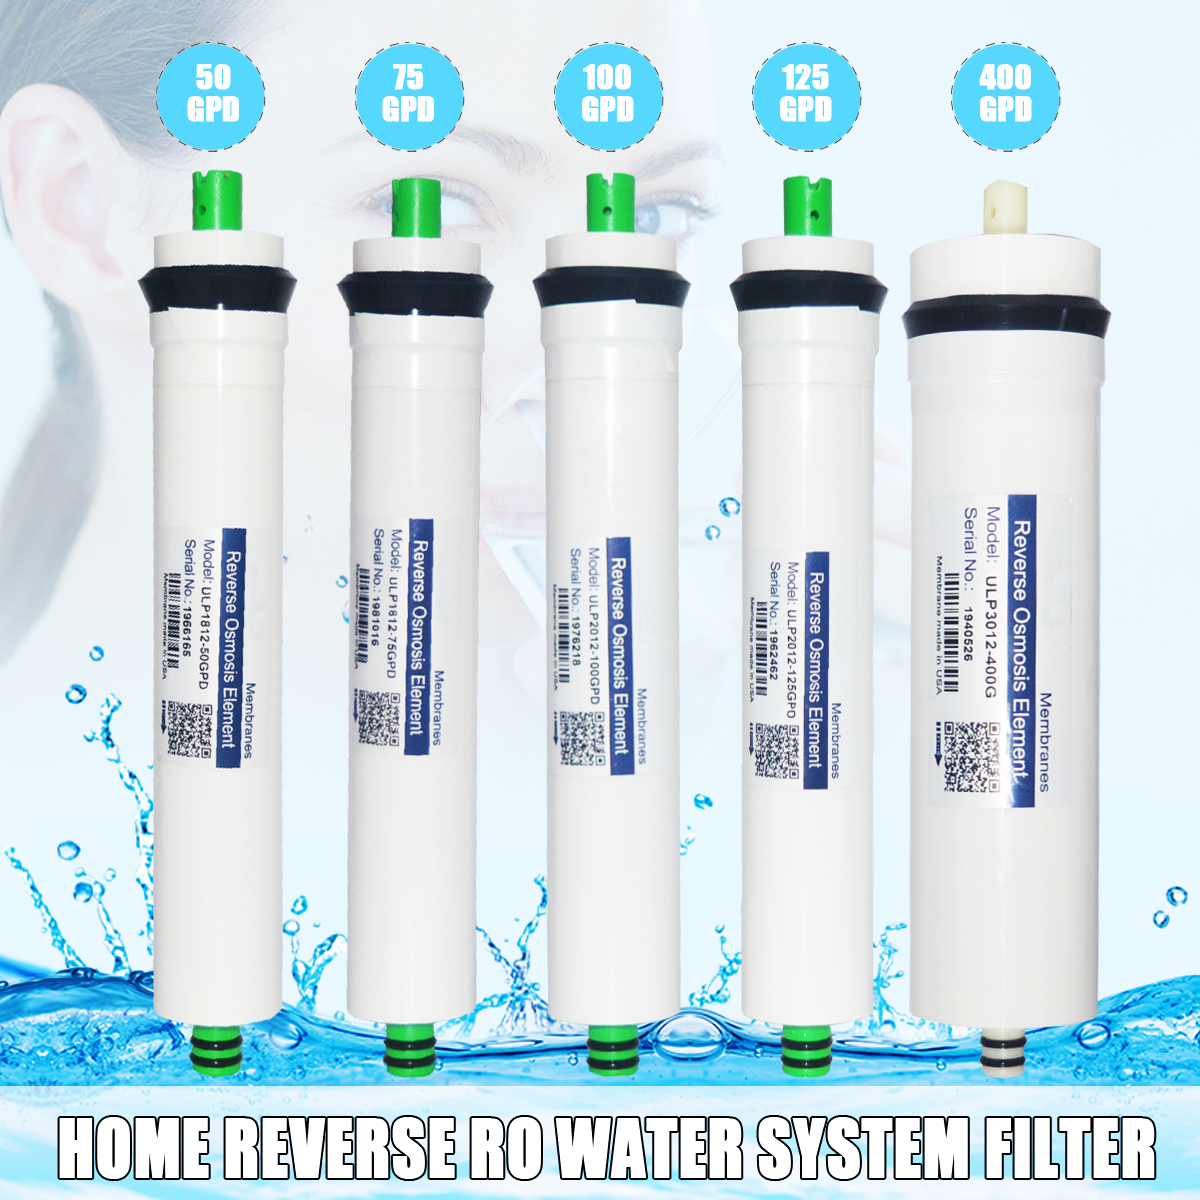 Reverse-Osmosis-Membrane-Replacement-RO-Water-System-Filter-5075100125150400G-1425879-1